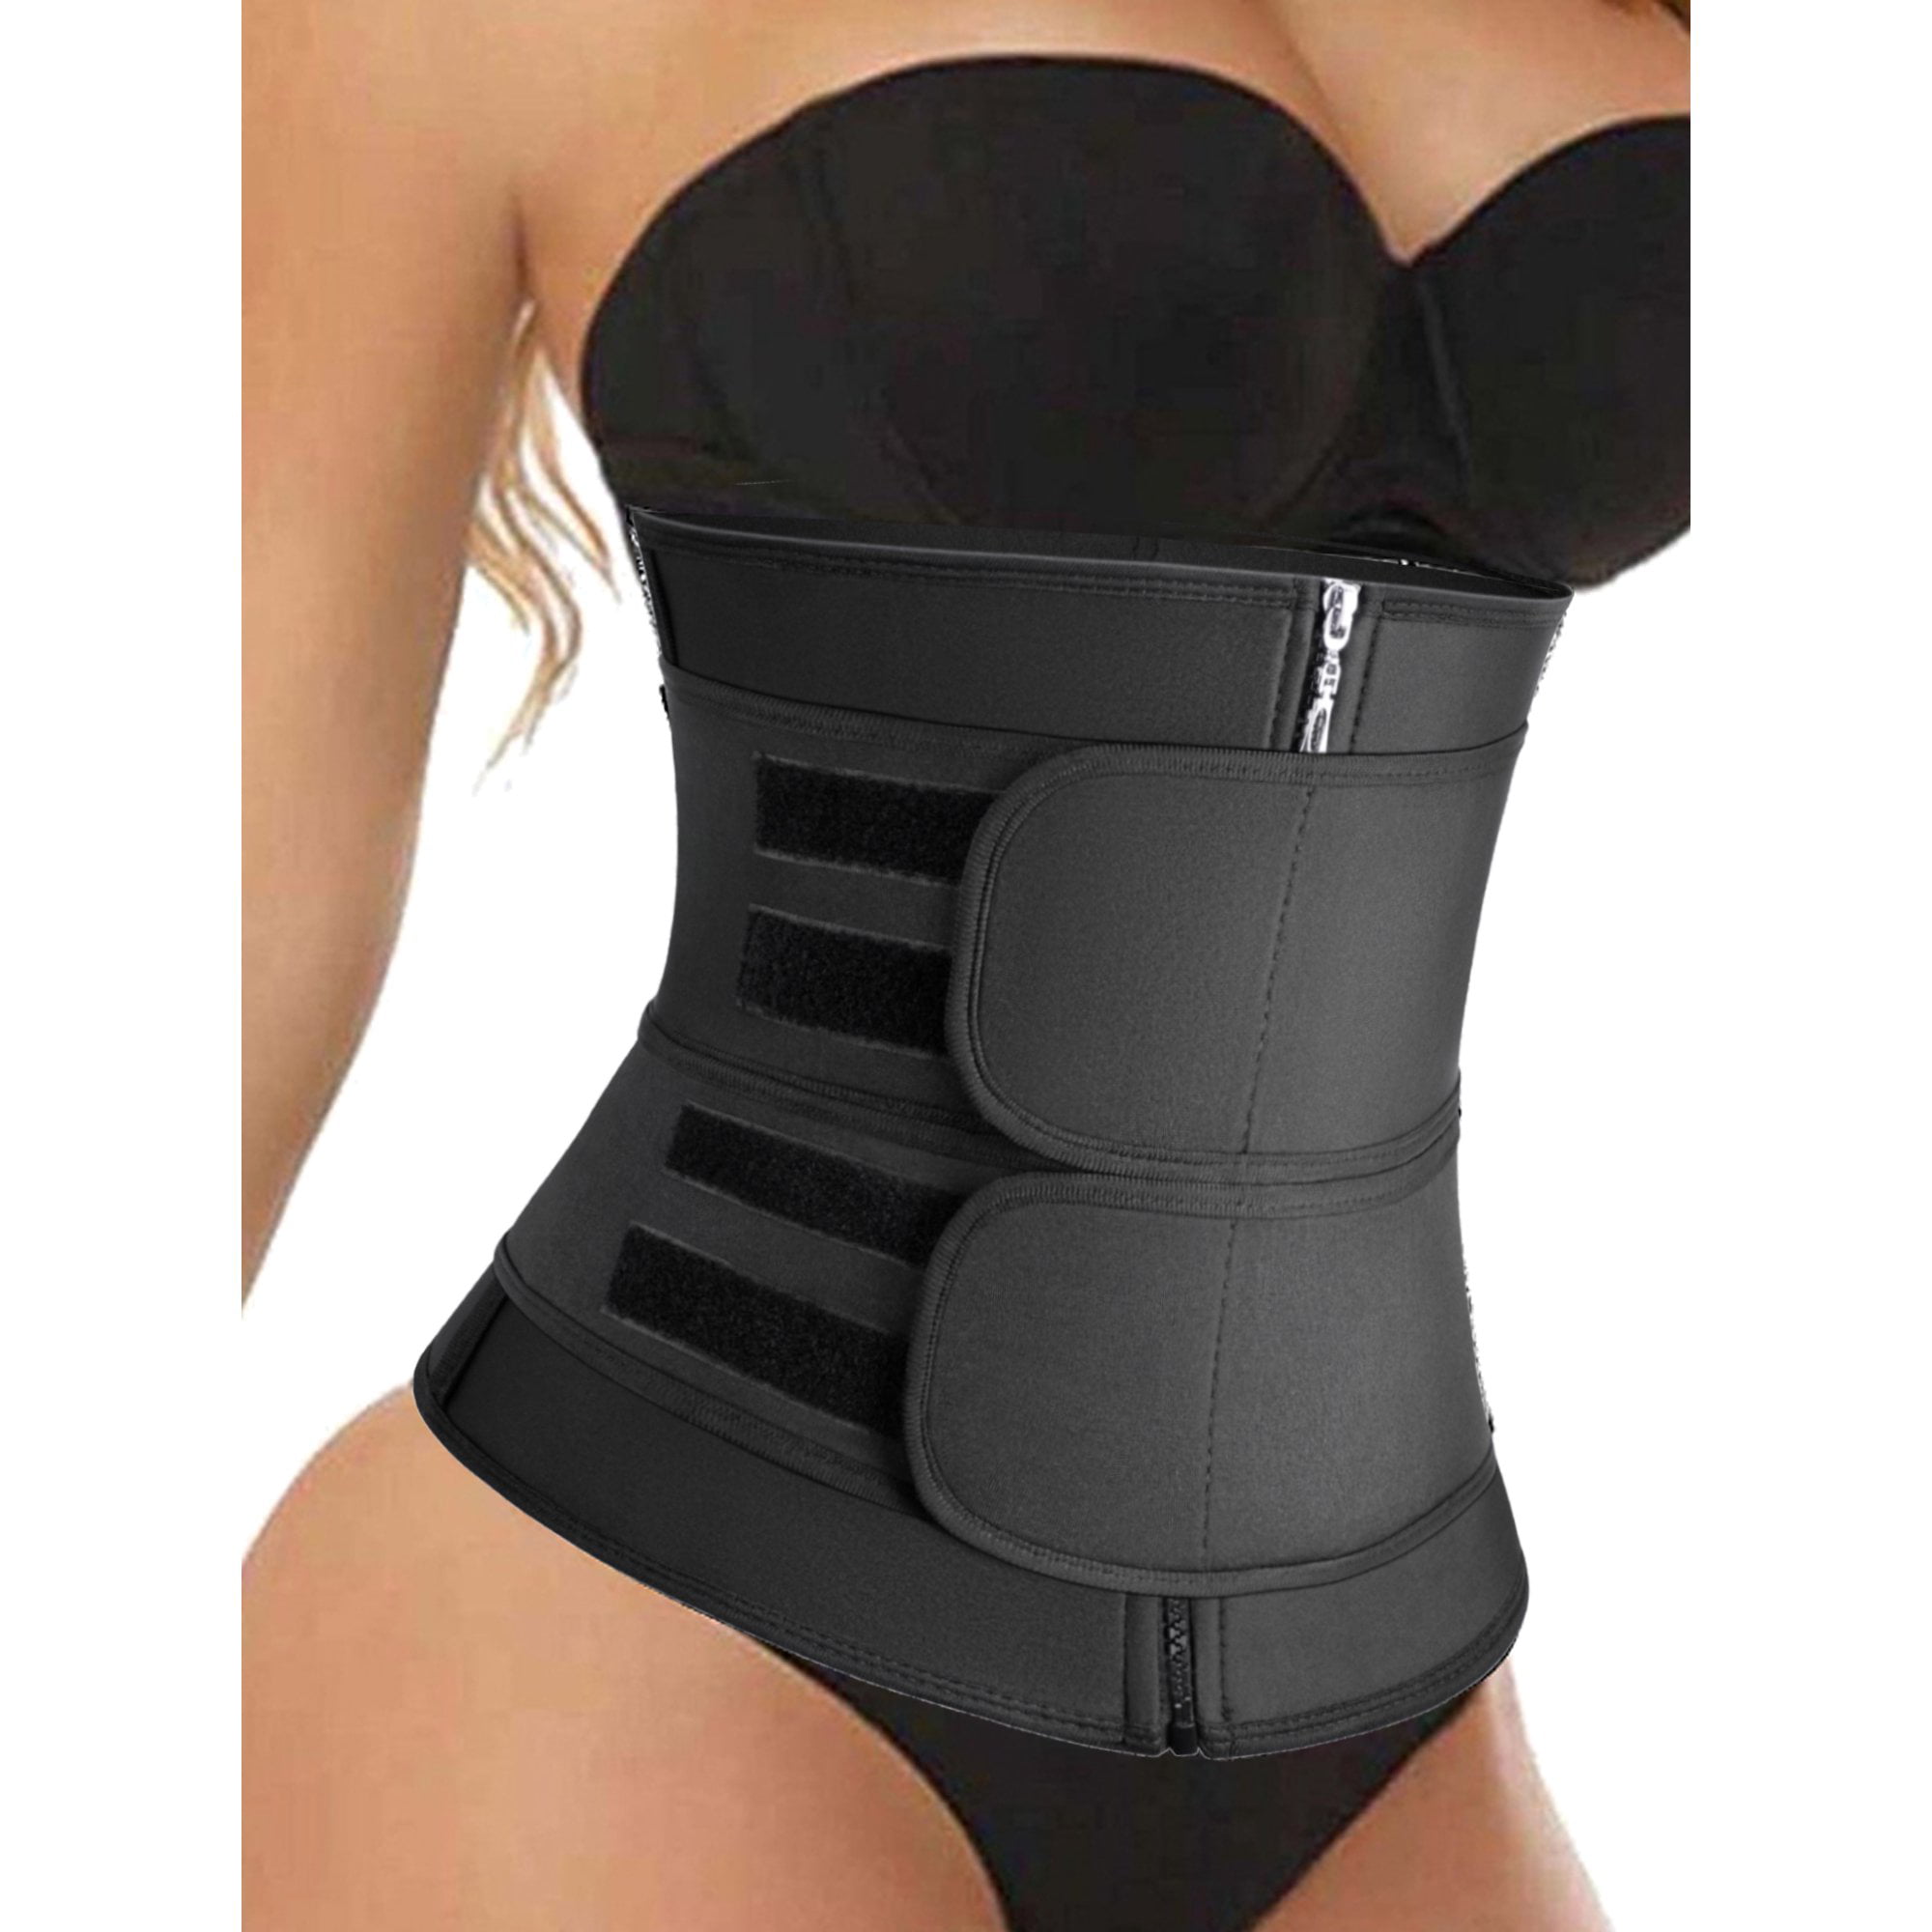 Waist Trainer for Women Posture Improvement Sport Gym Essentials Pull On Girdle Corsets Weight Loss Shapewear 